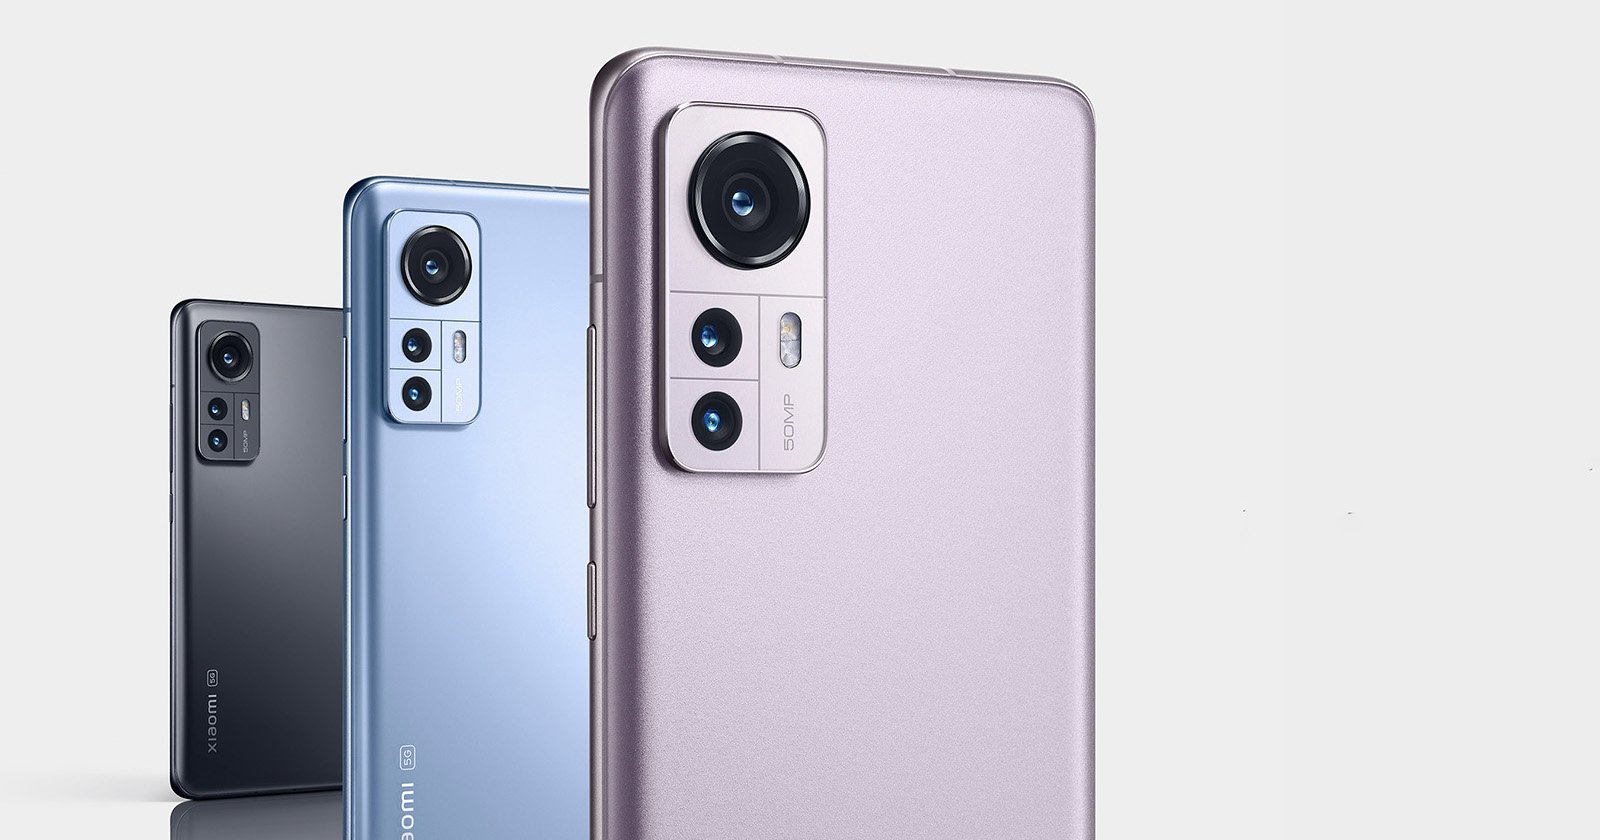 Xiaomi unveils concept phone with interchangeable camera lenses